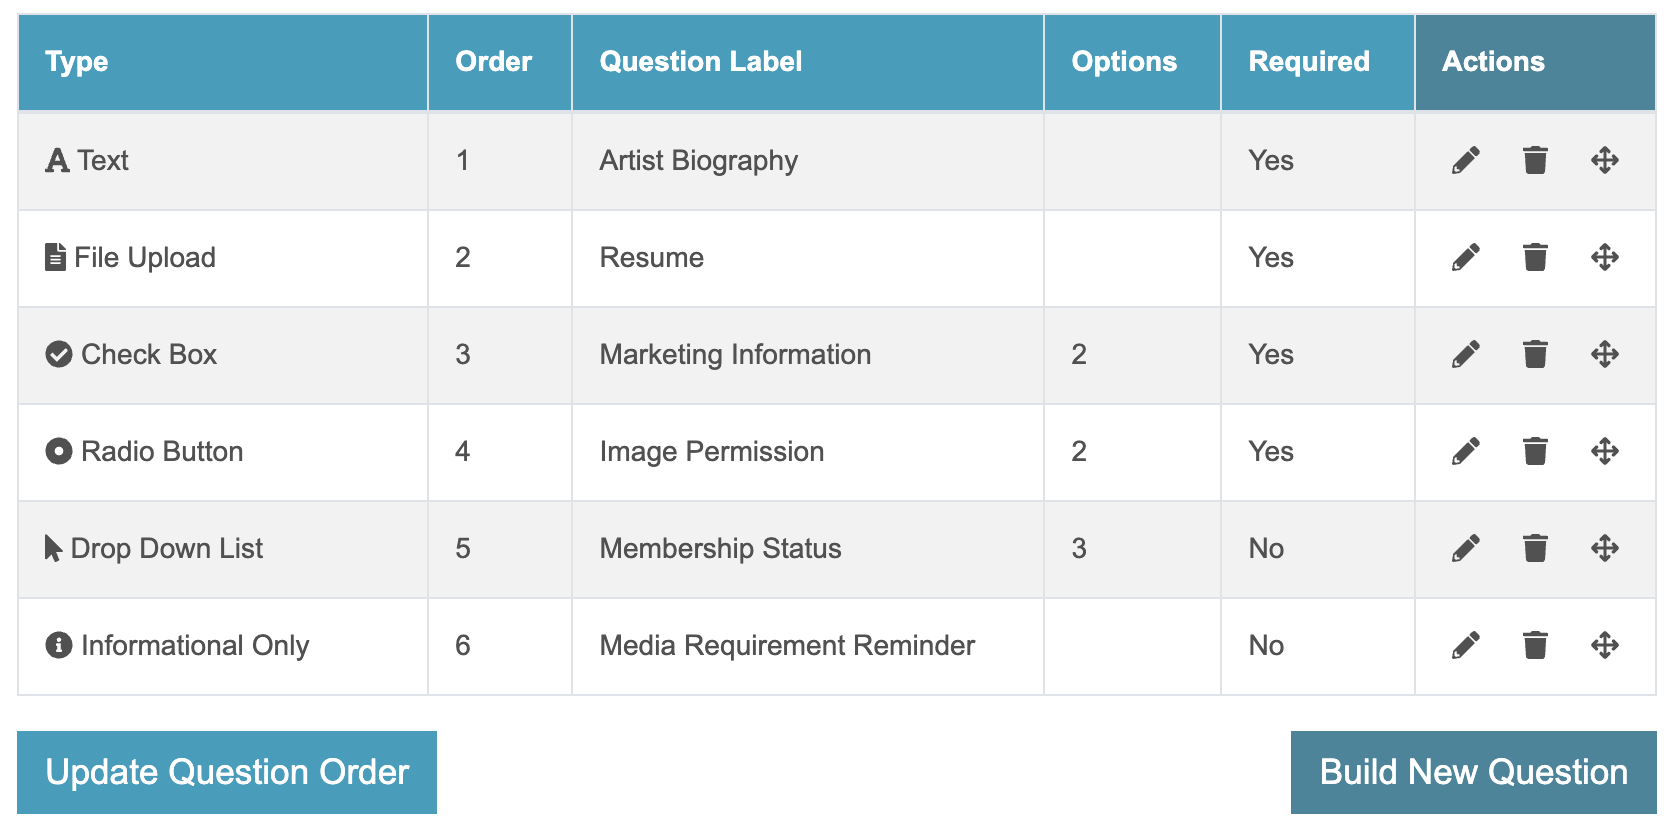 Screenshot of the question table where you can see all the questions in the application.